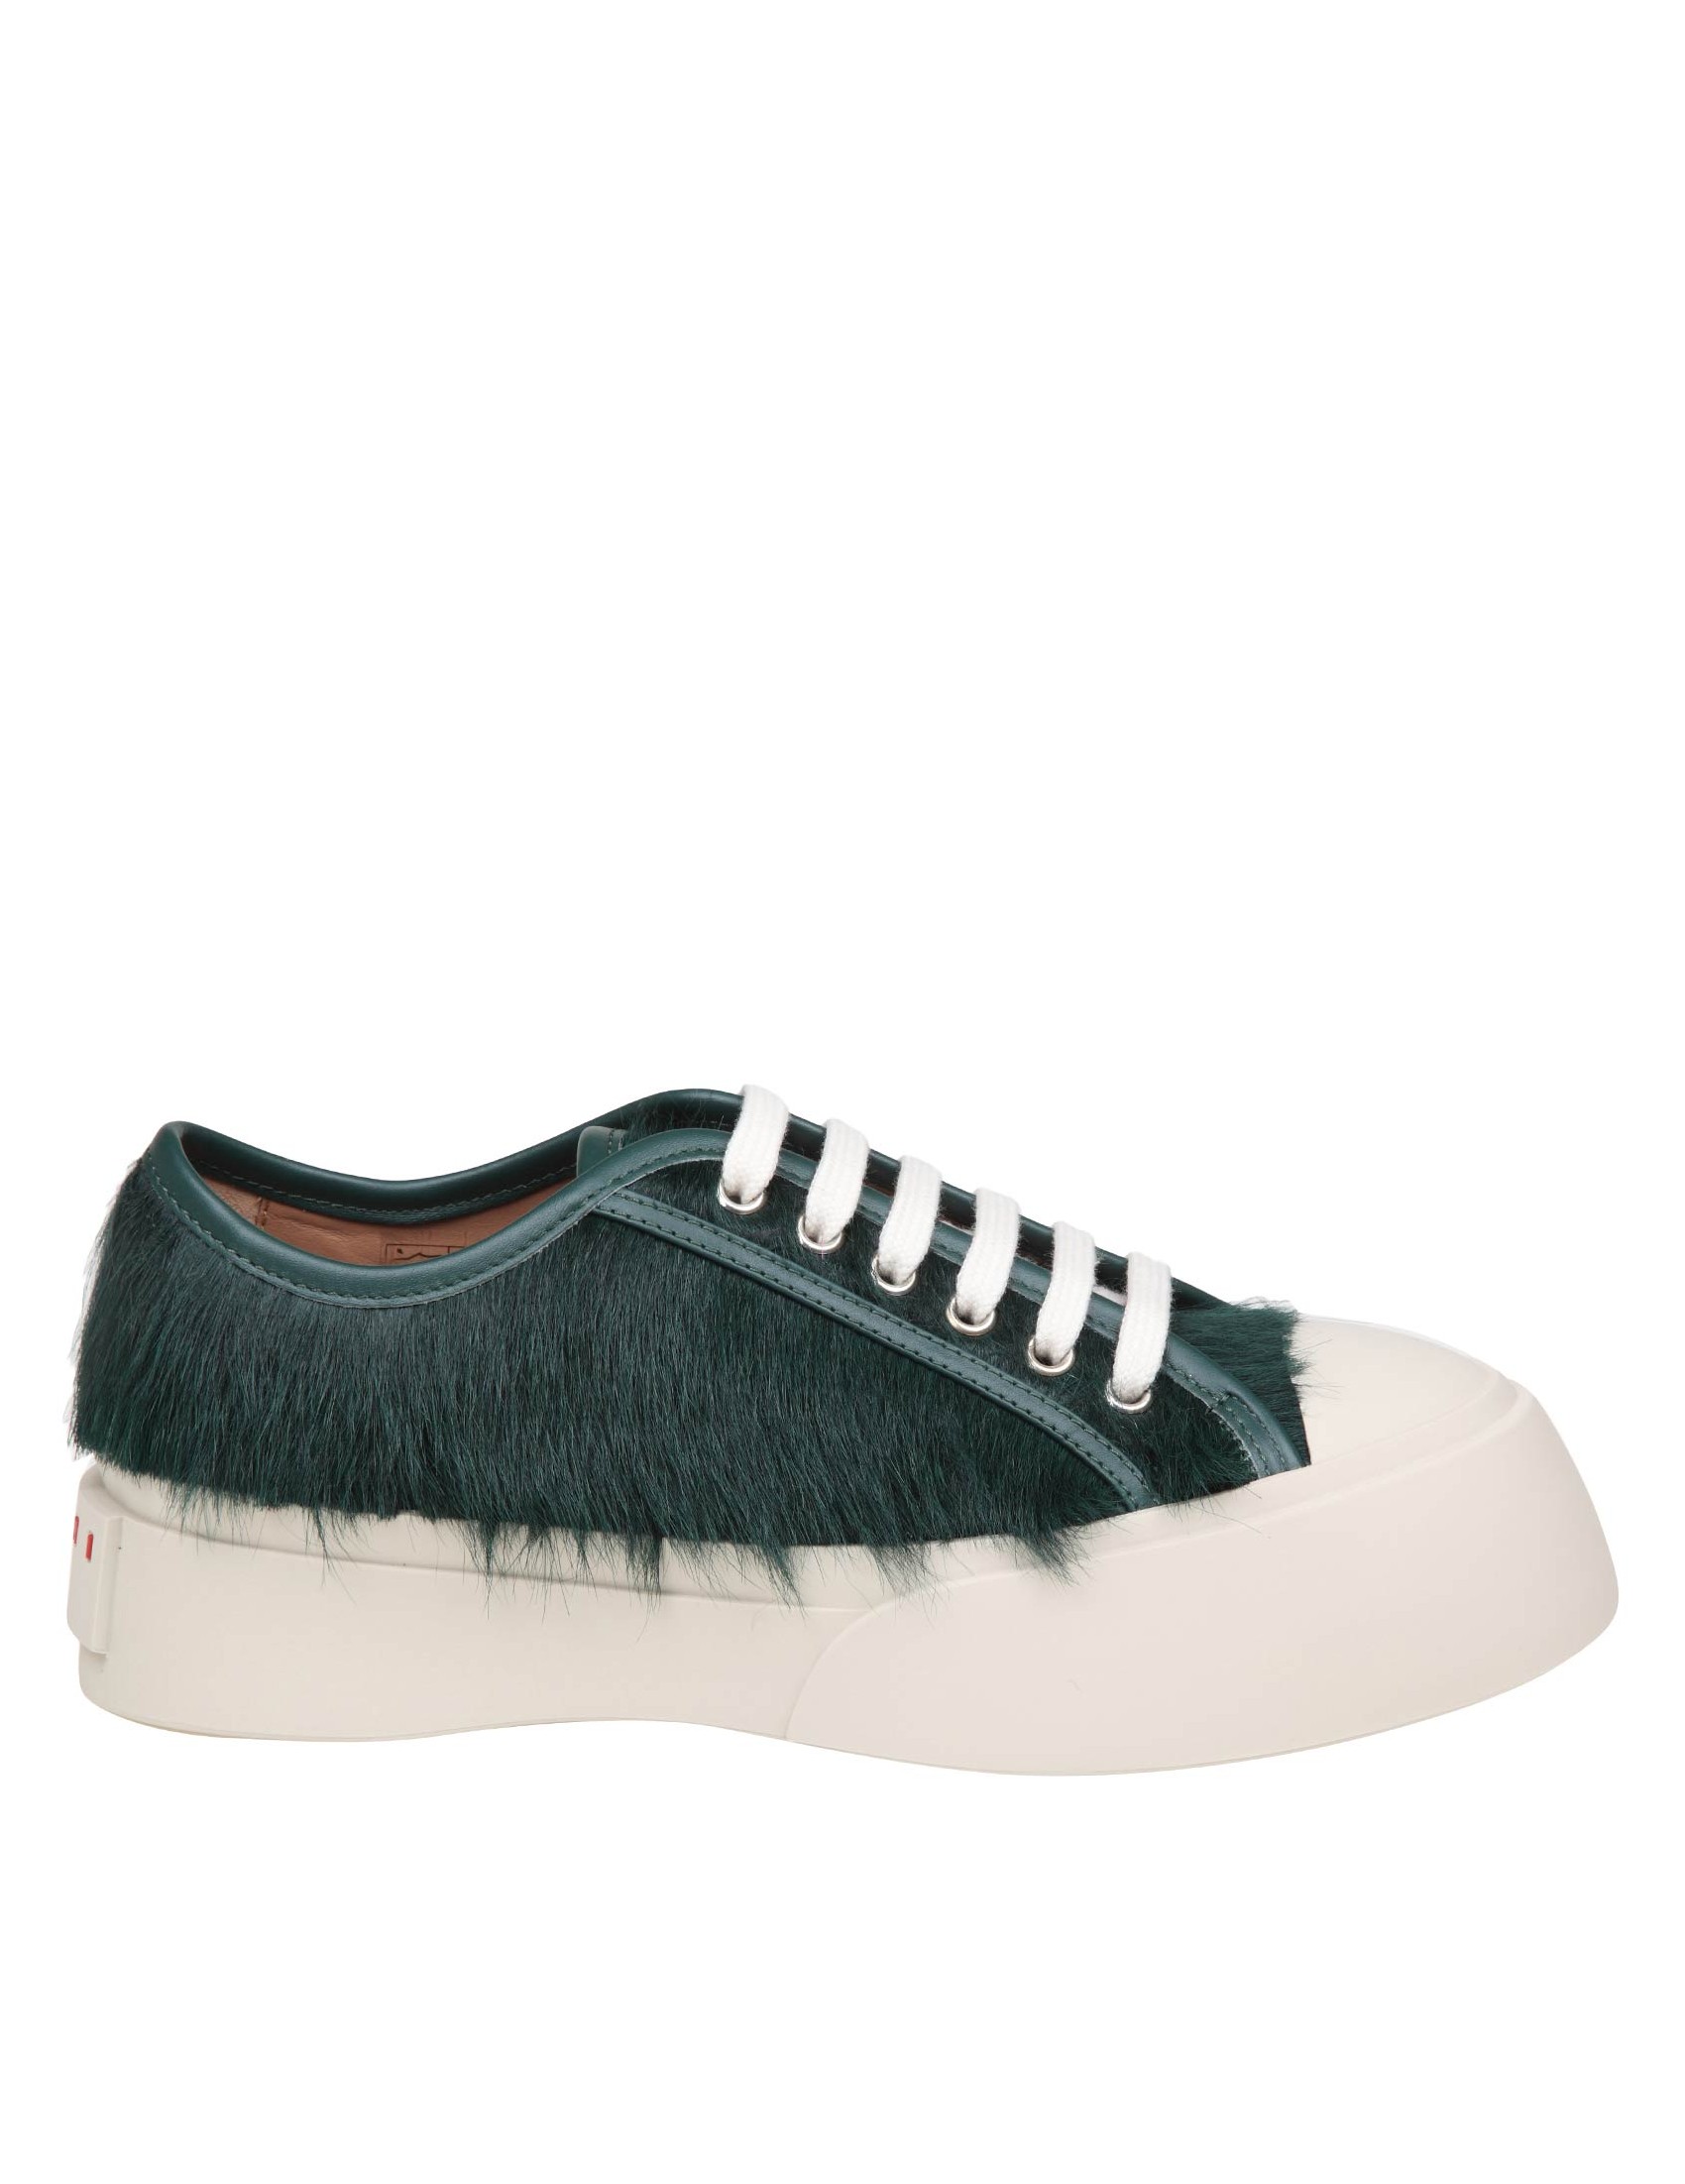 MARNI PABLO SNEAKERS IN GREEN LONG-HAIR LEATHER